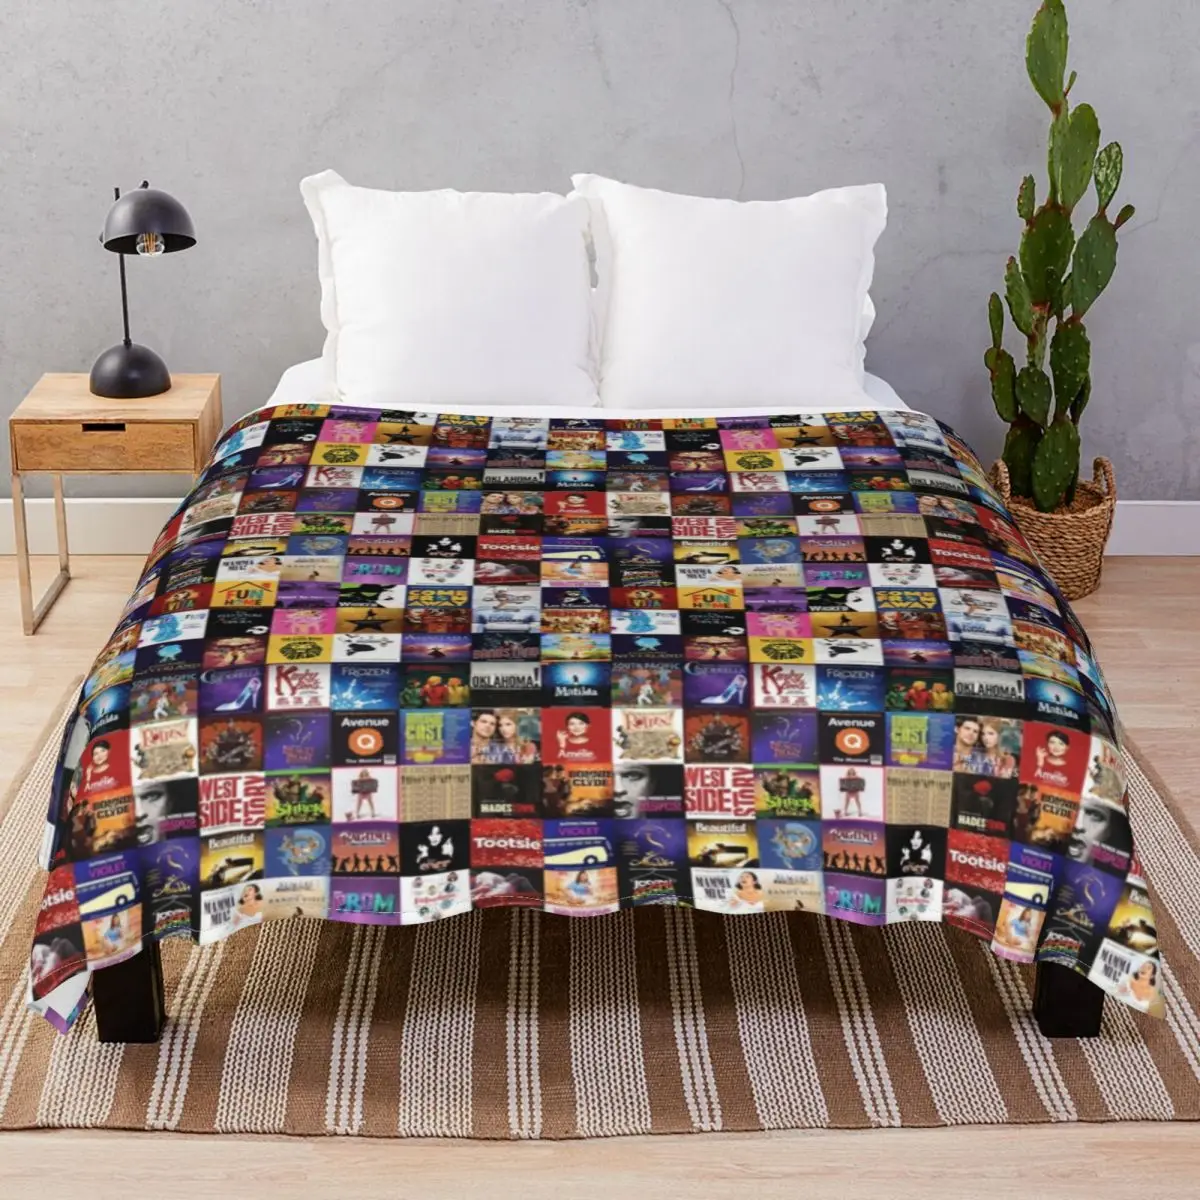 Musicals Collage Blanket Flannel Textile Decor Super Warm Throw Blankets for Bed Home Couch Camp Office